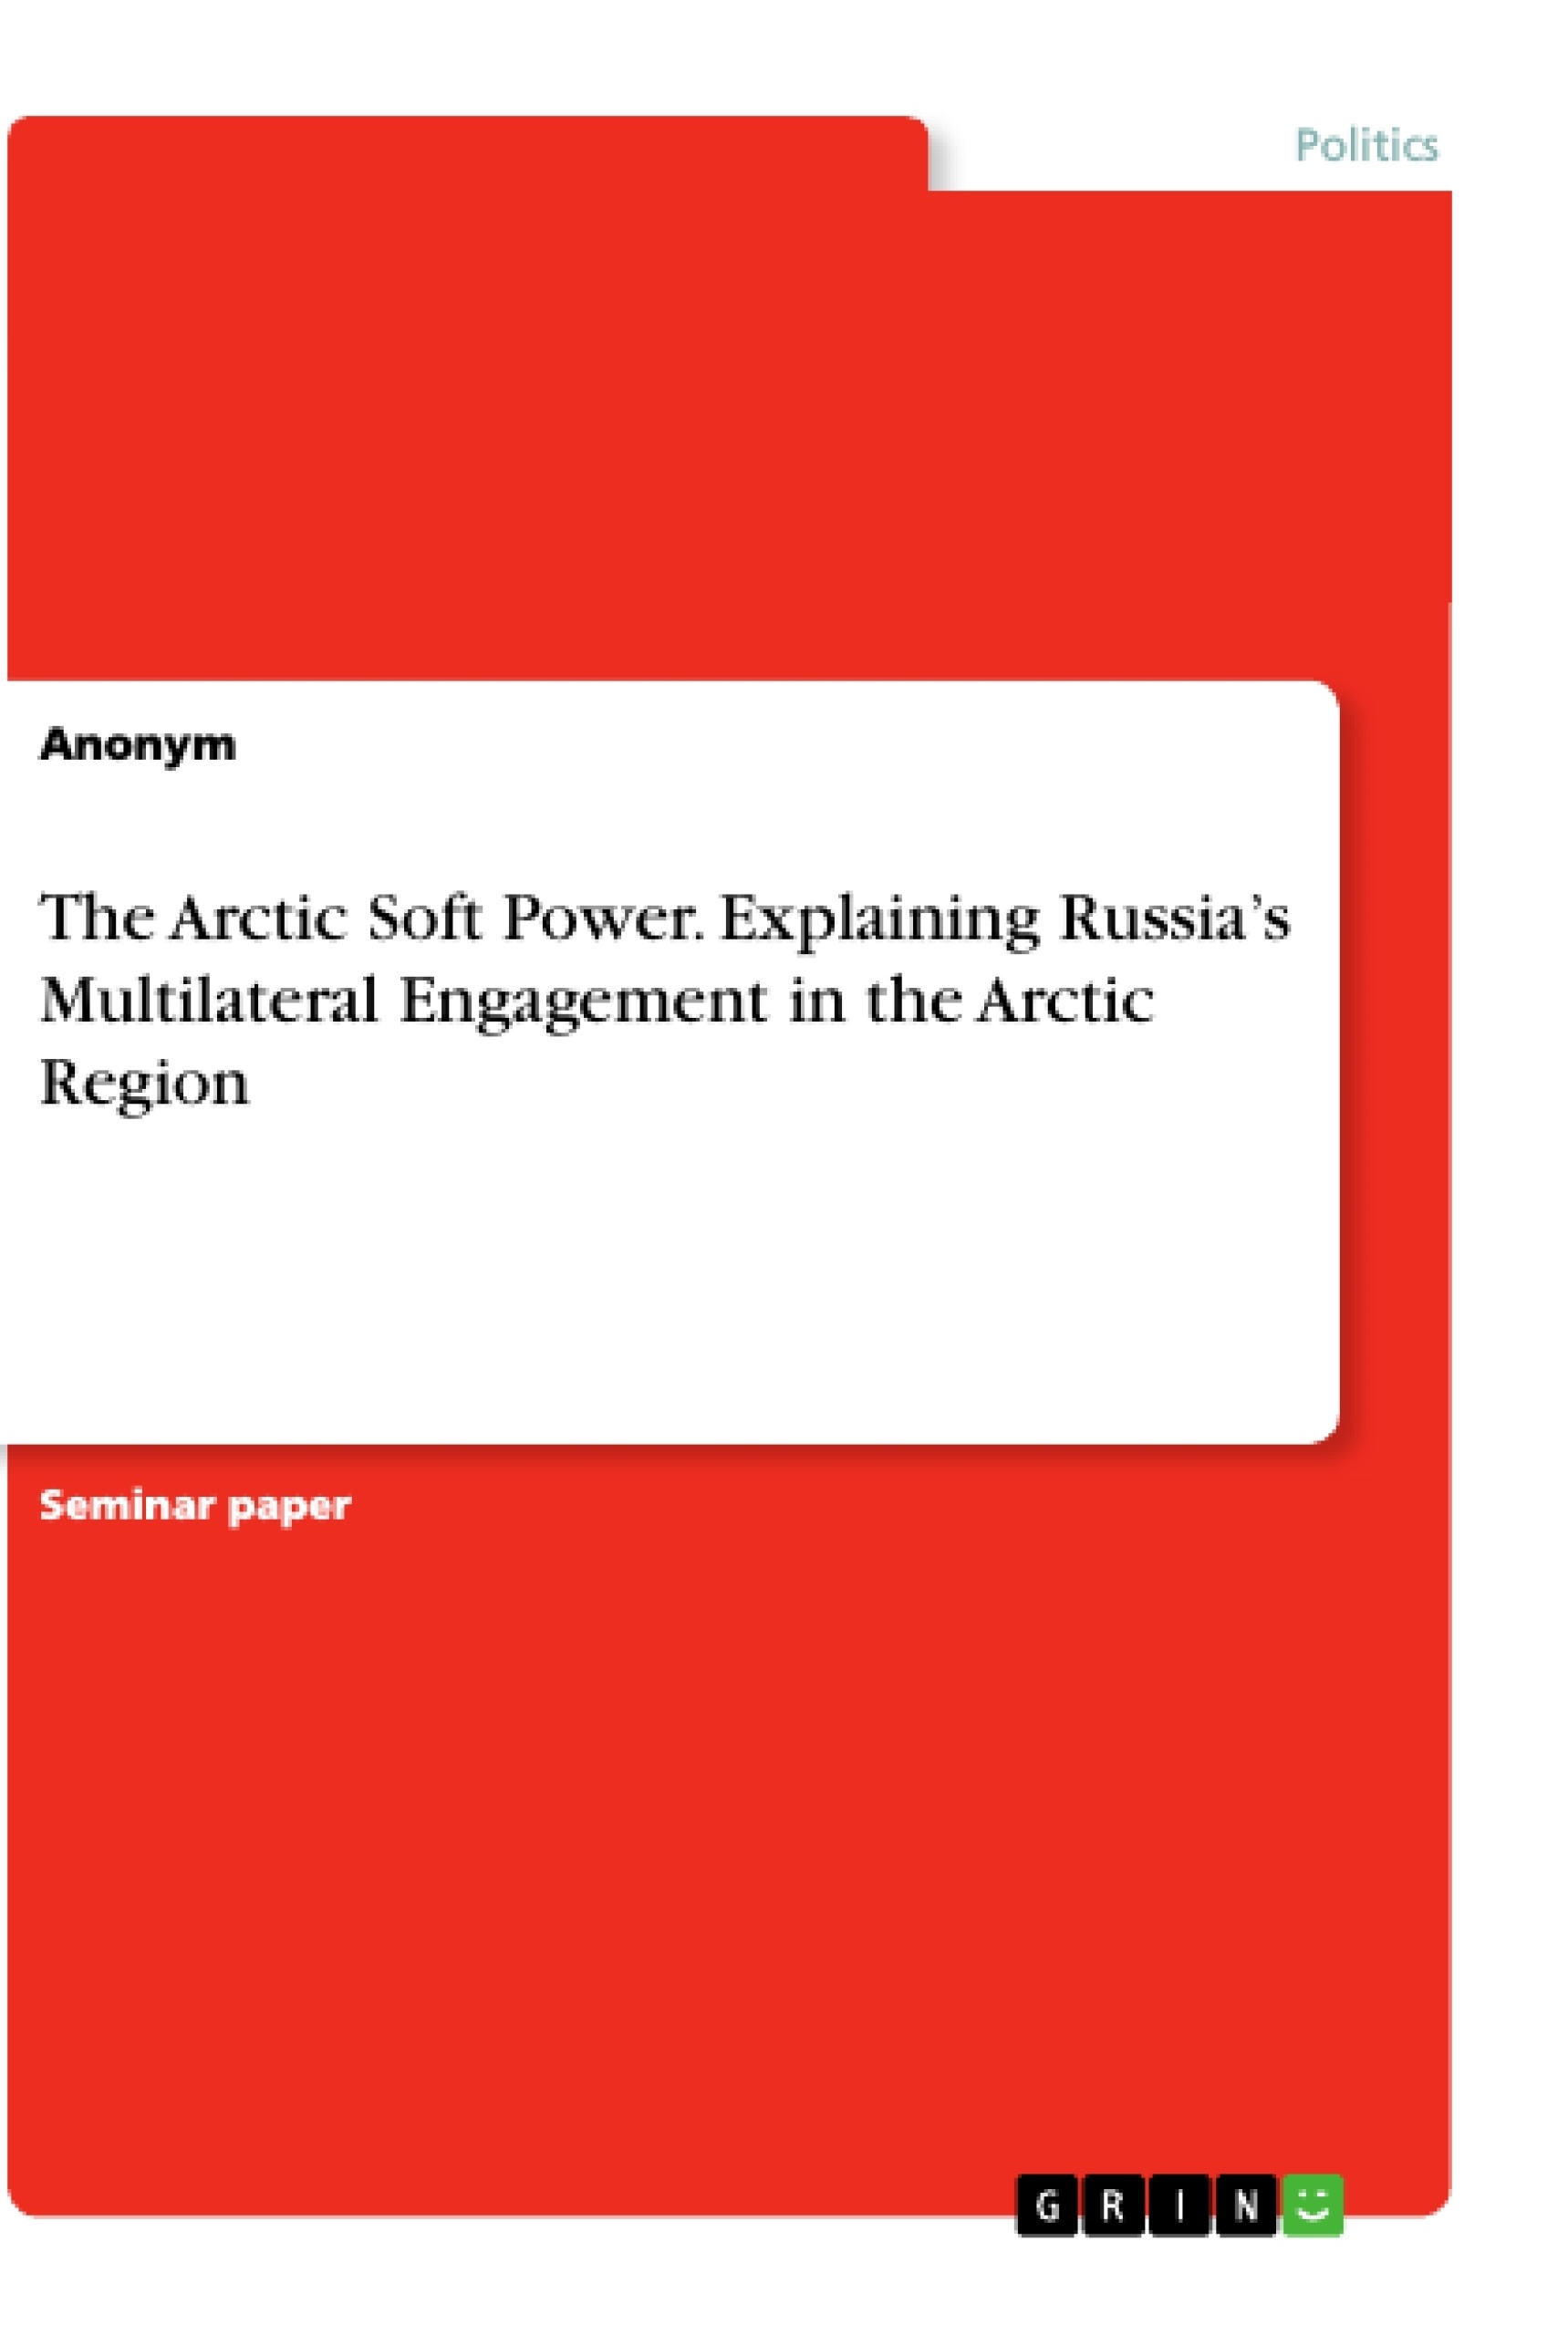 Título: The Arctic Soft Power. Explaining Russia’s Multilateral Engagement in the Arctic Region